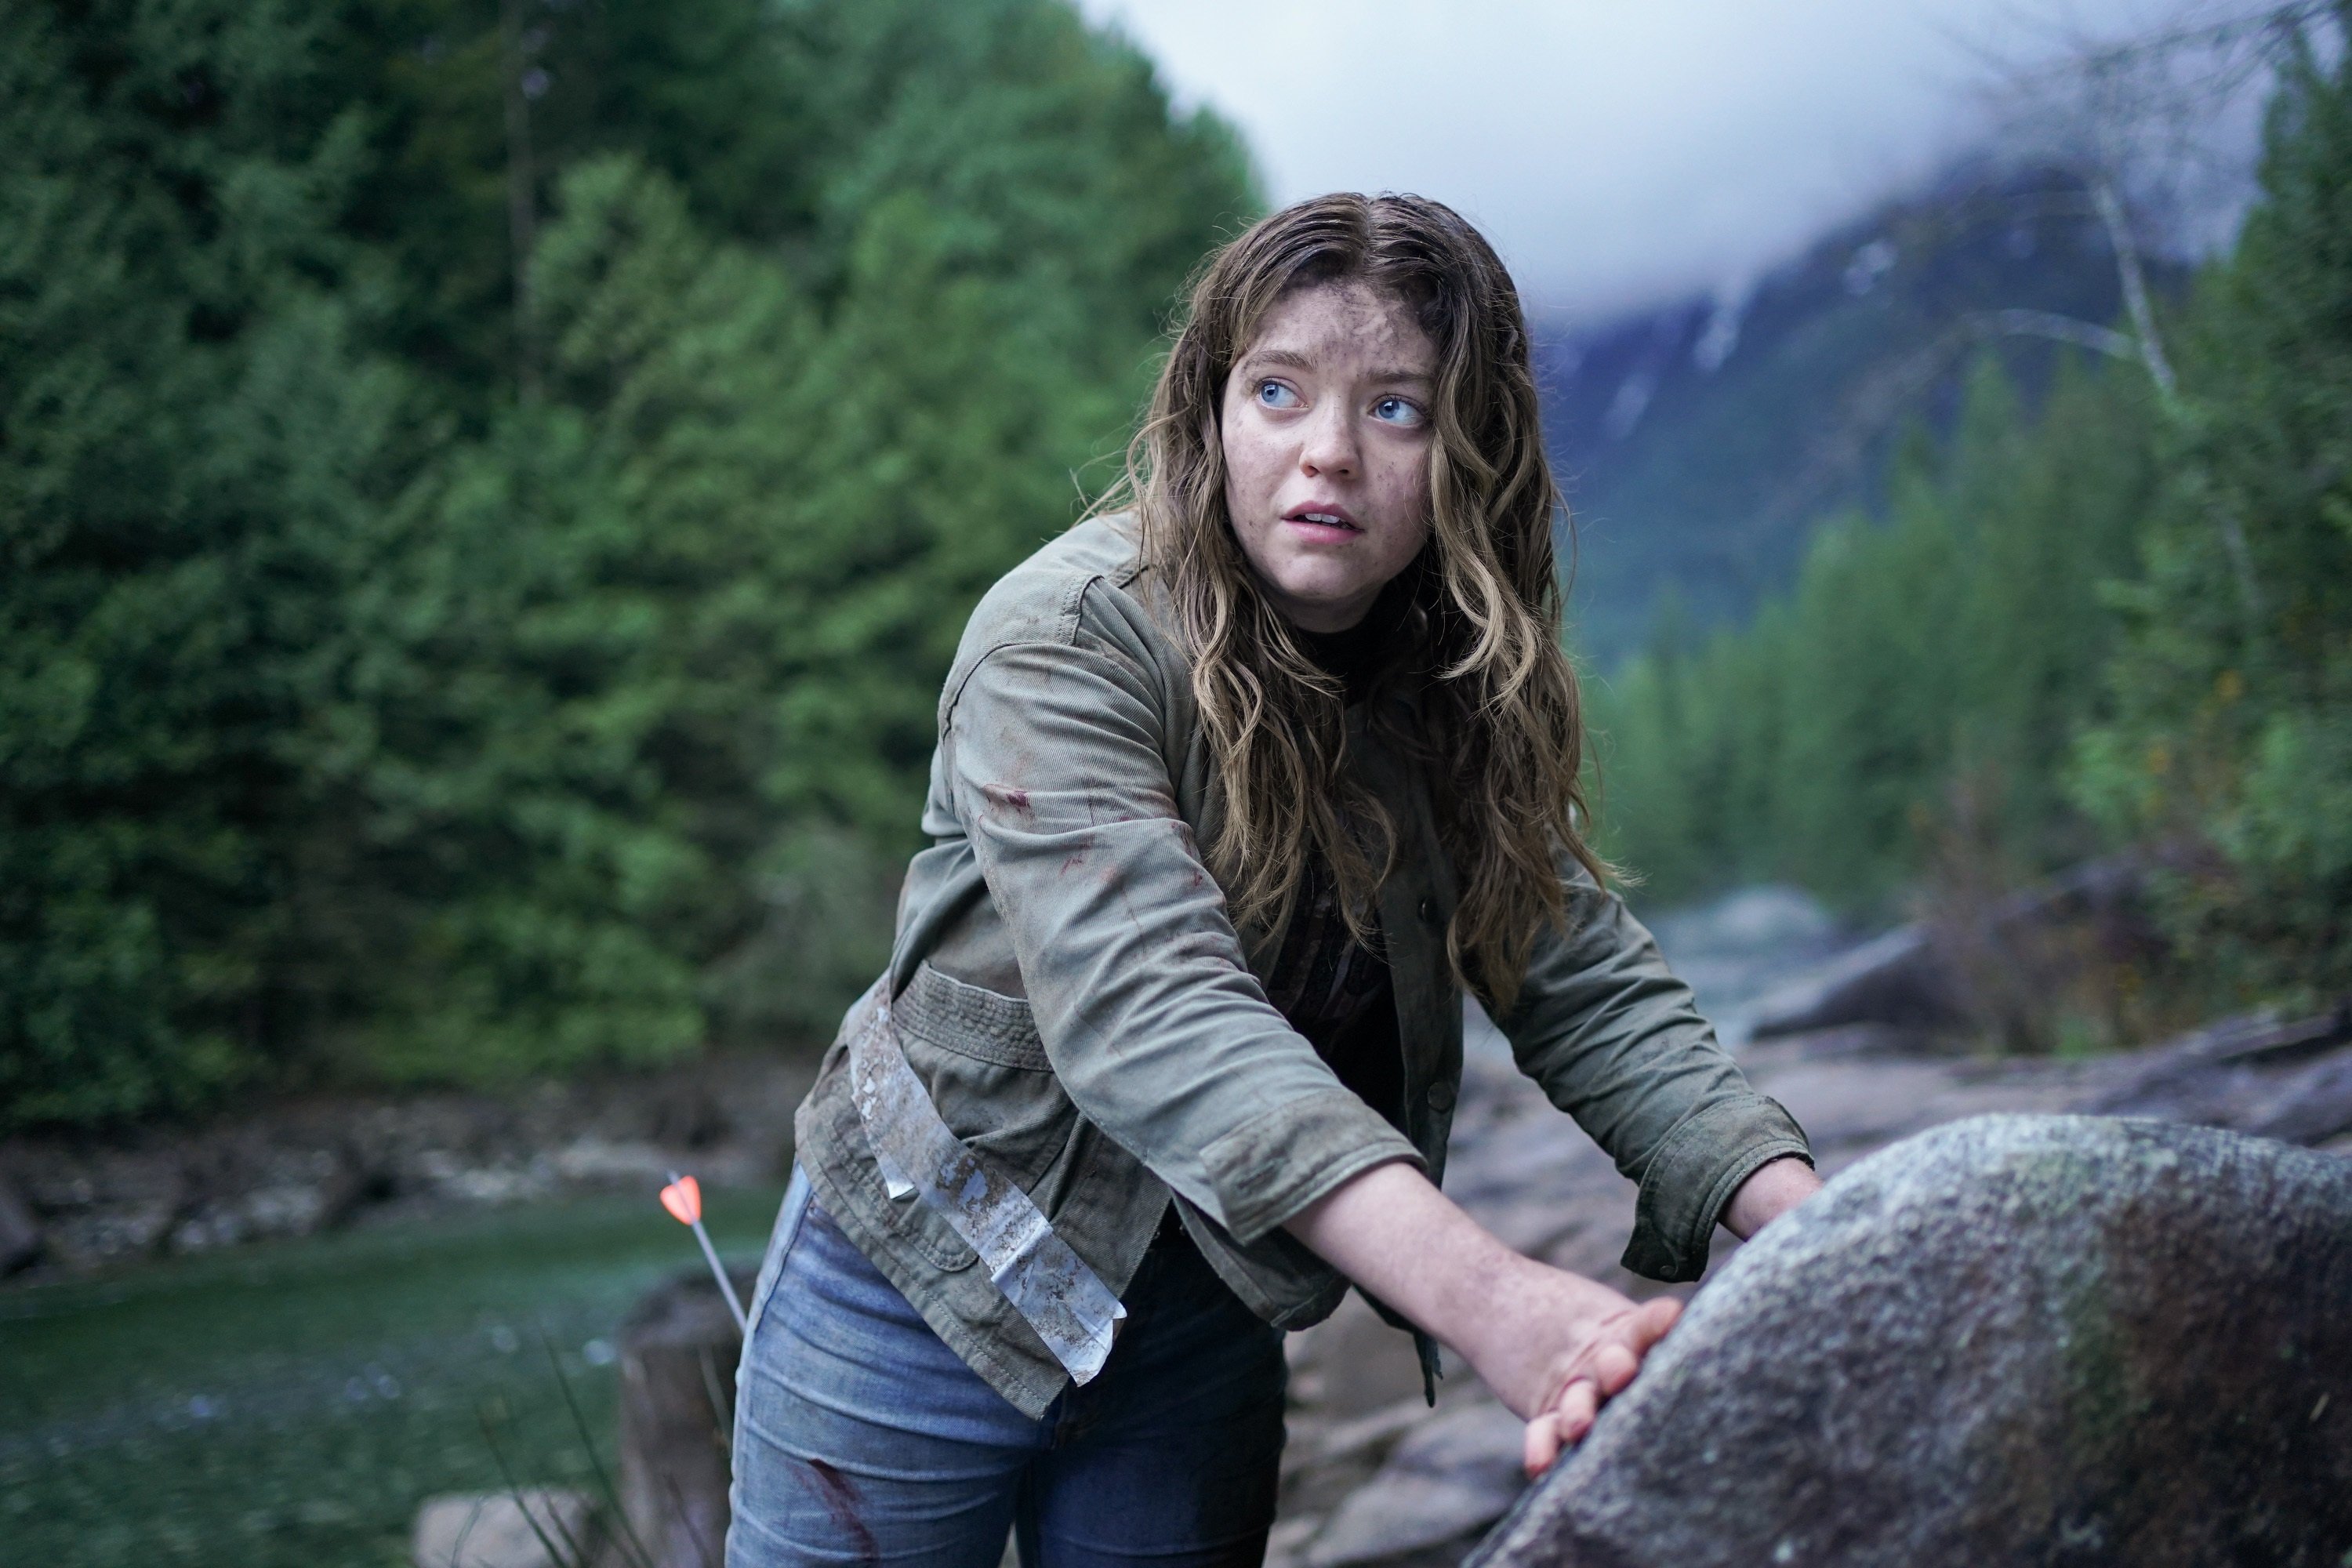 Big Sky star Jade Pettyjohn acting as Grace after her role as Reese Witherspoons daughter in Little Fires Everywhere